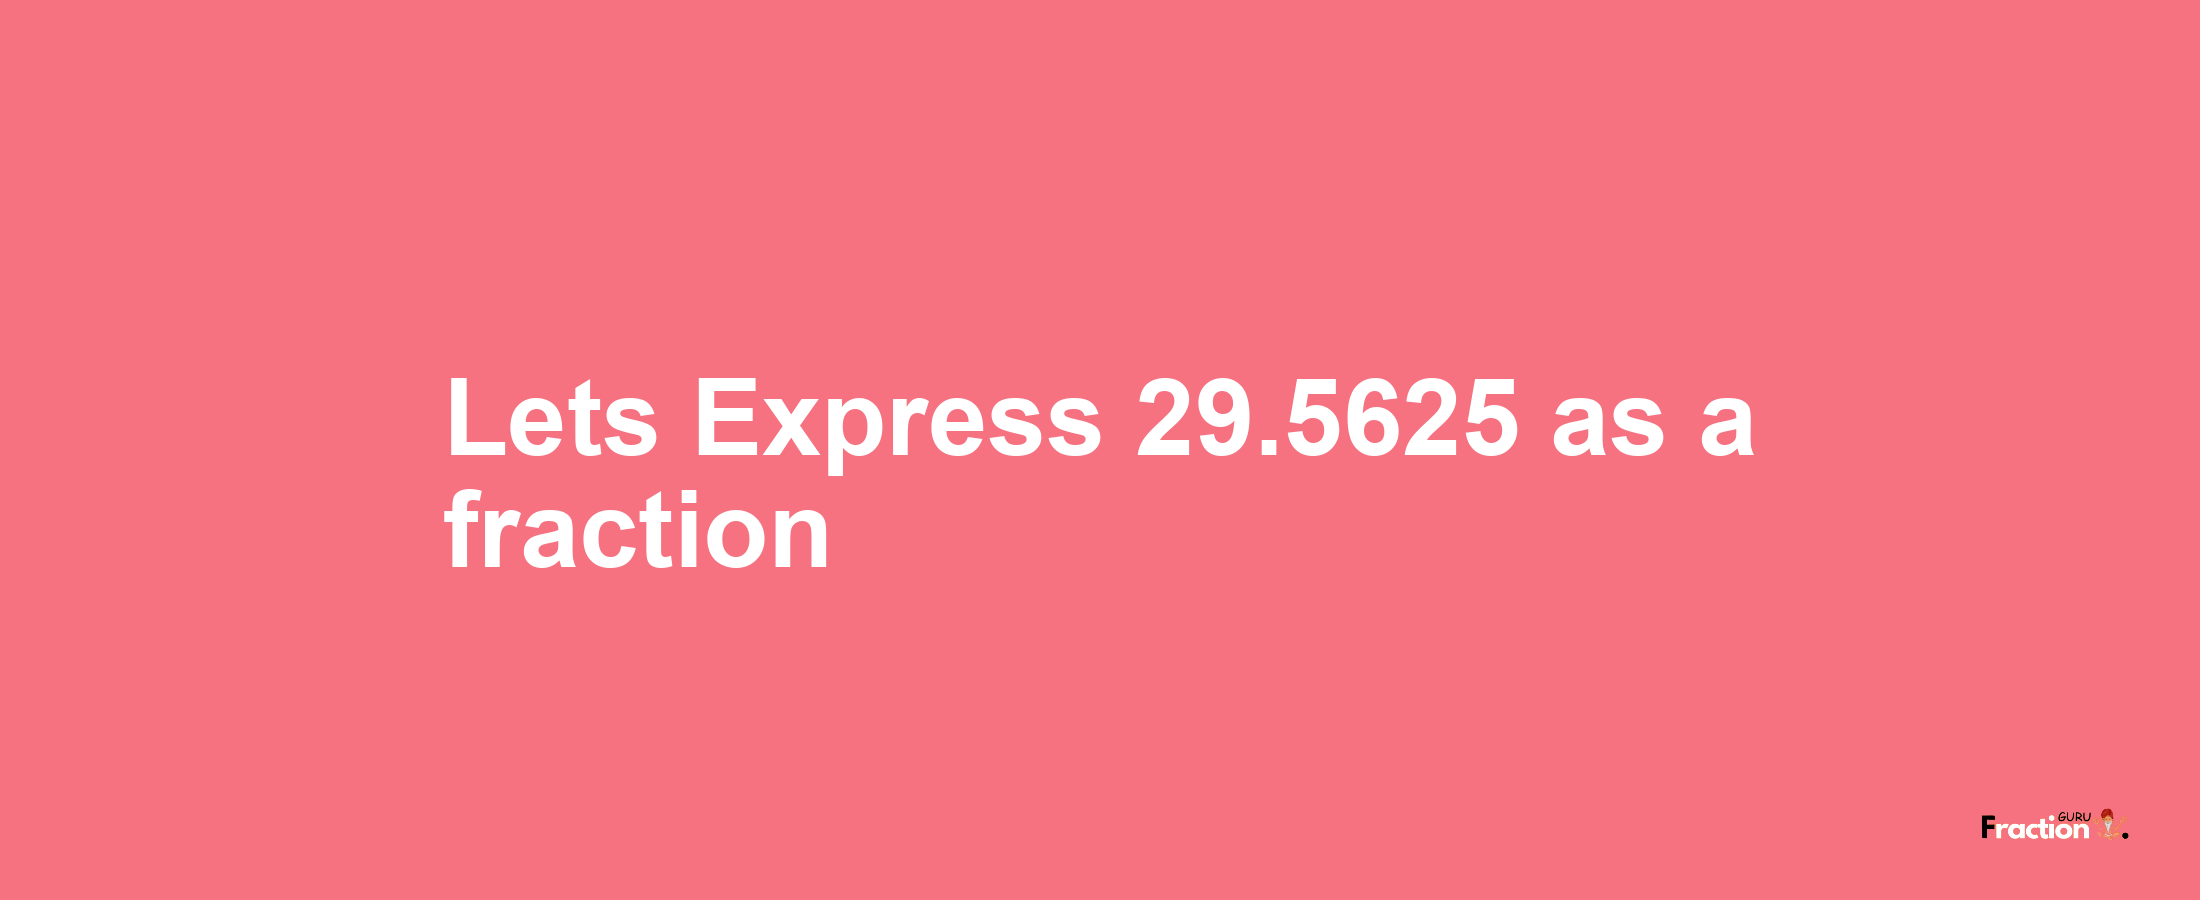 Lets Express 29.5625 as afraction